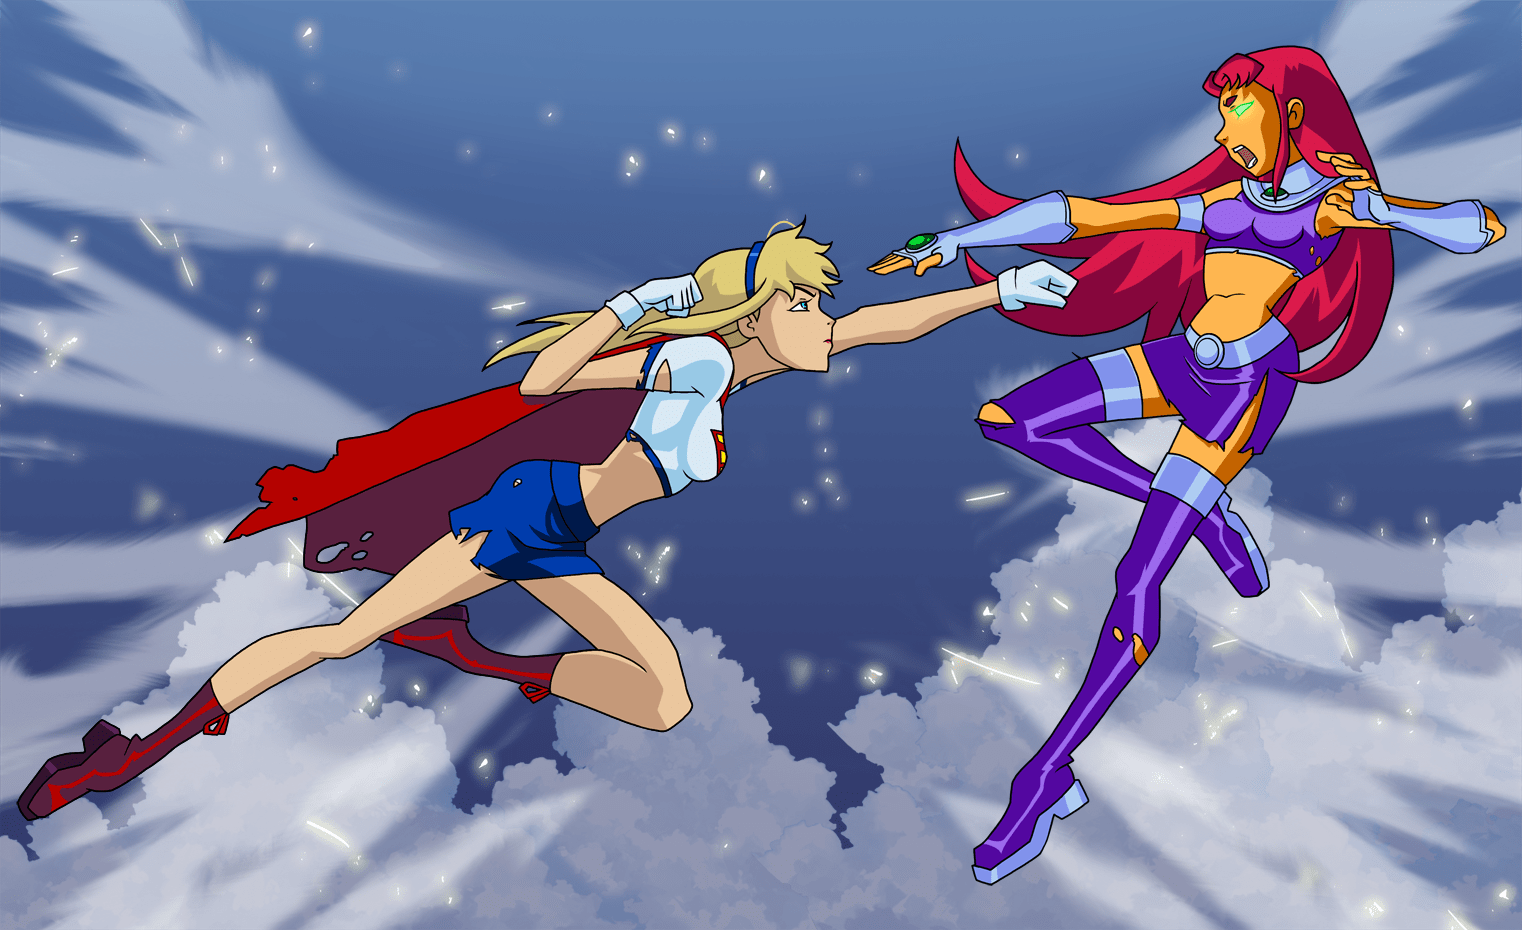 DC: Supergirl Vs Power Girl: Who Would Win?